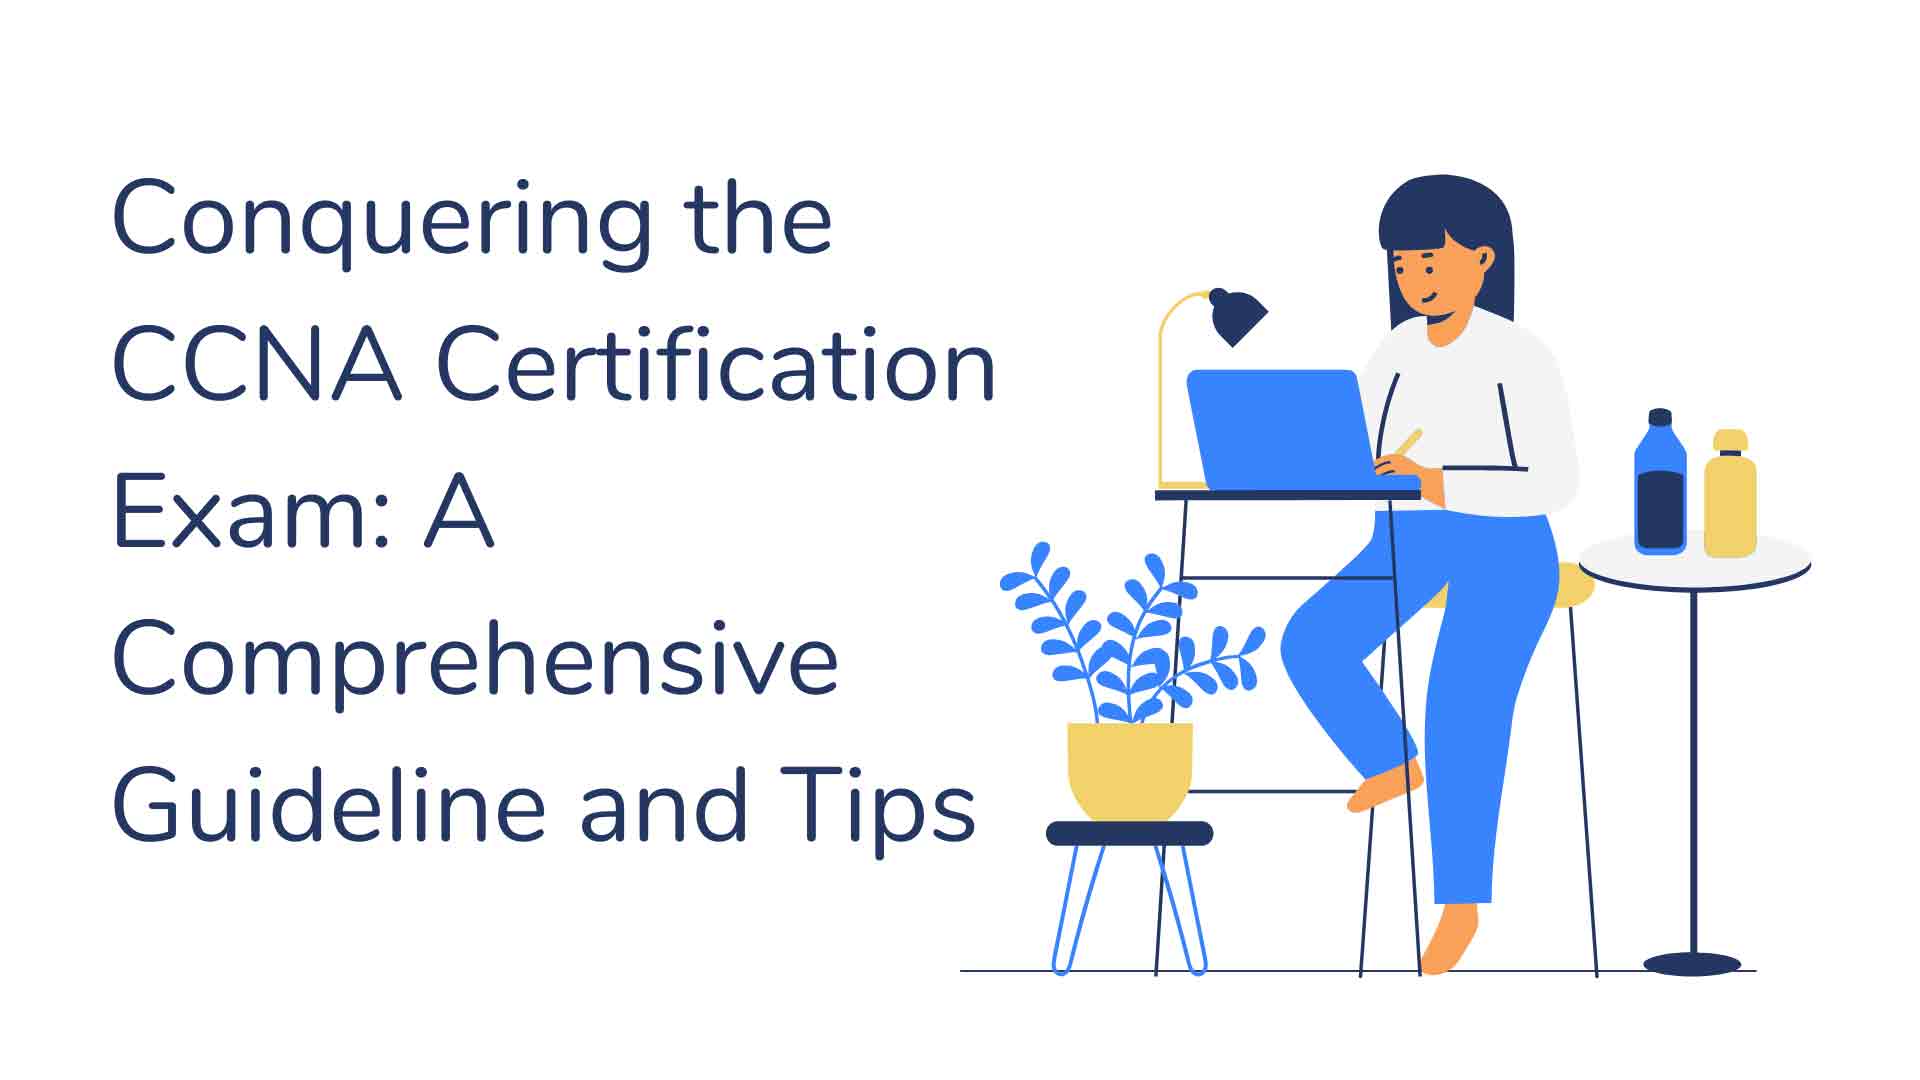 Conquering the CCNA Certification Exam: A Comprehensive Guideline and Tips